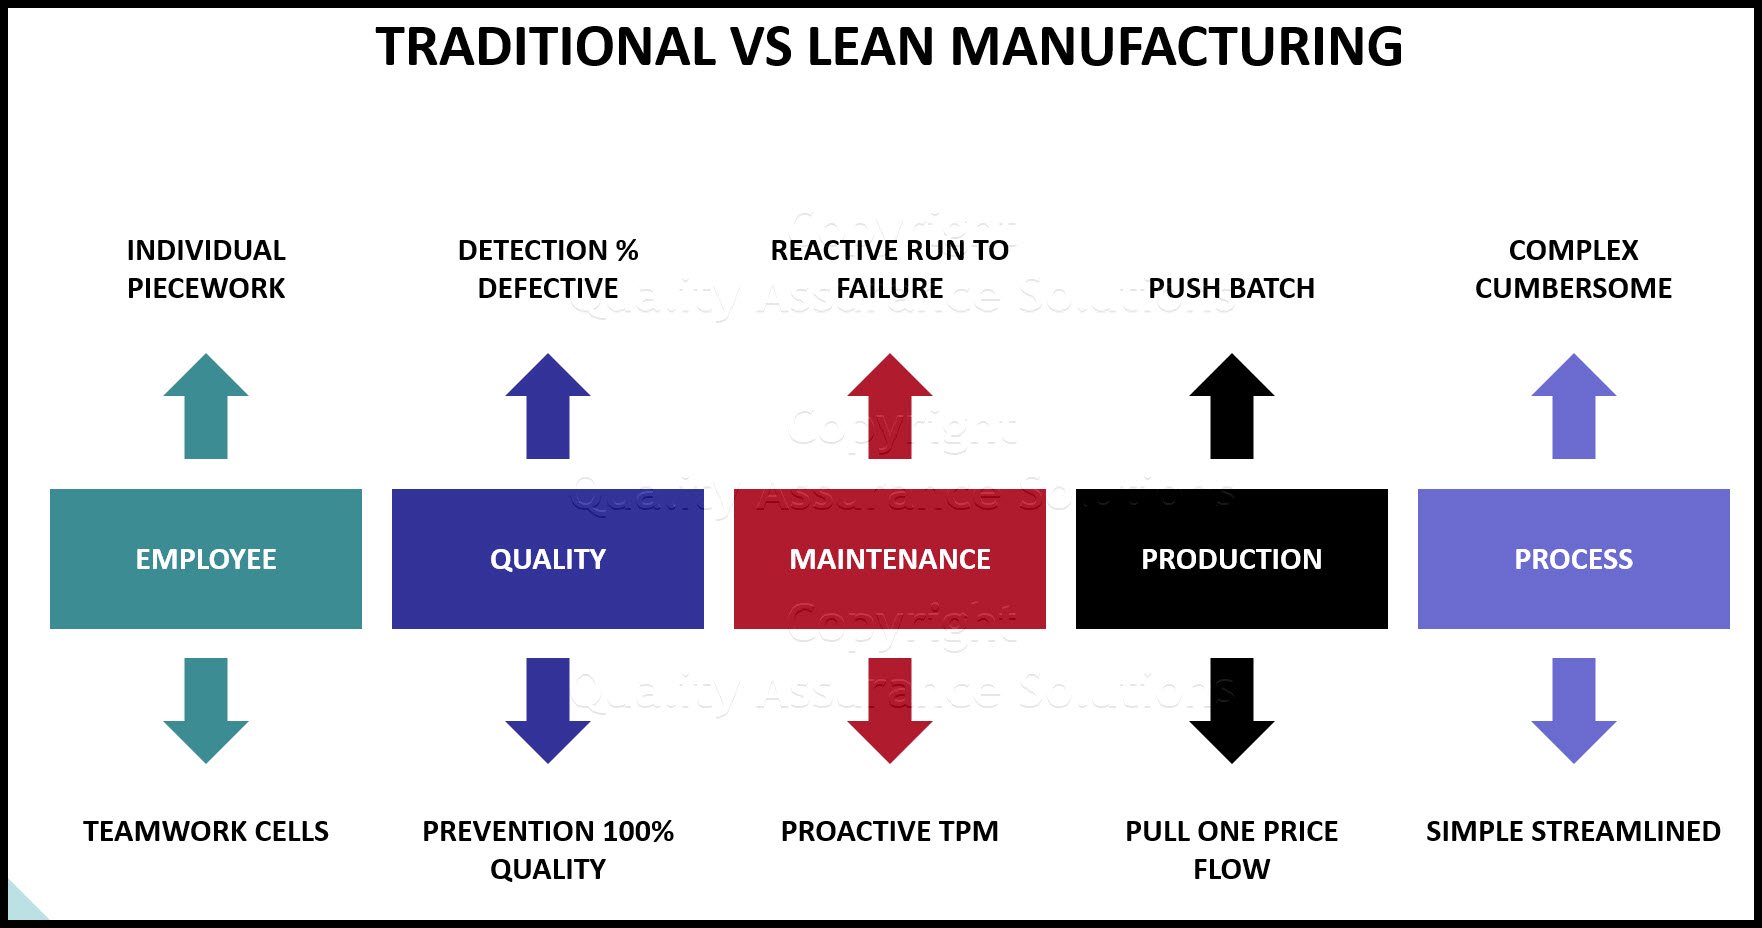 Lean manufacturing is a generic process management philosophy derived mostly from the Toyota Production System (TPS)